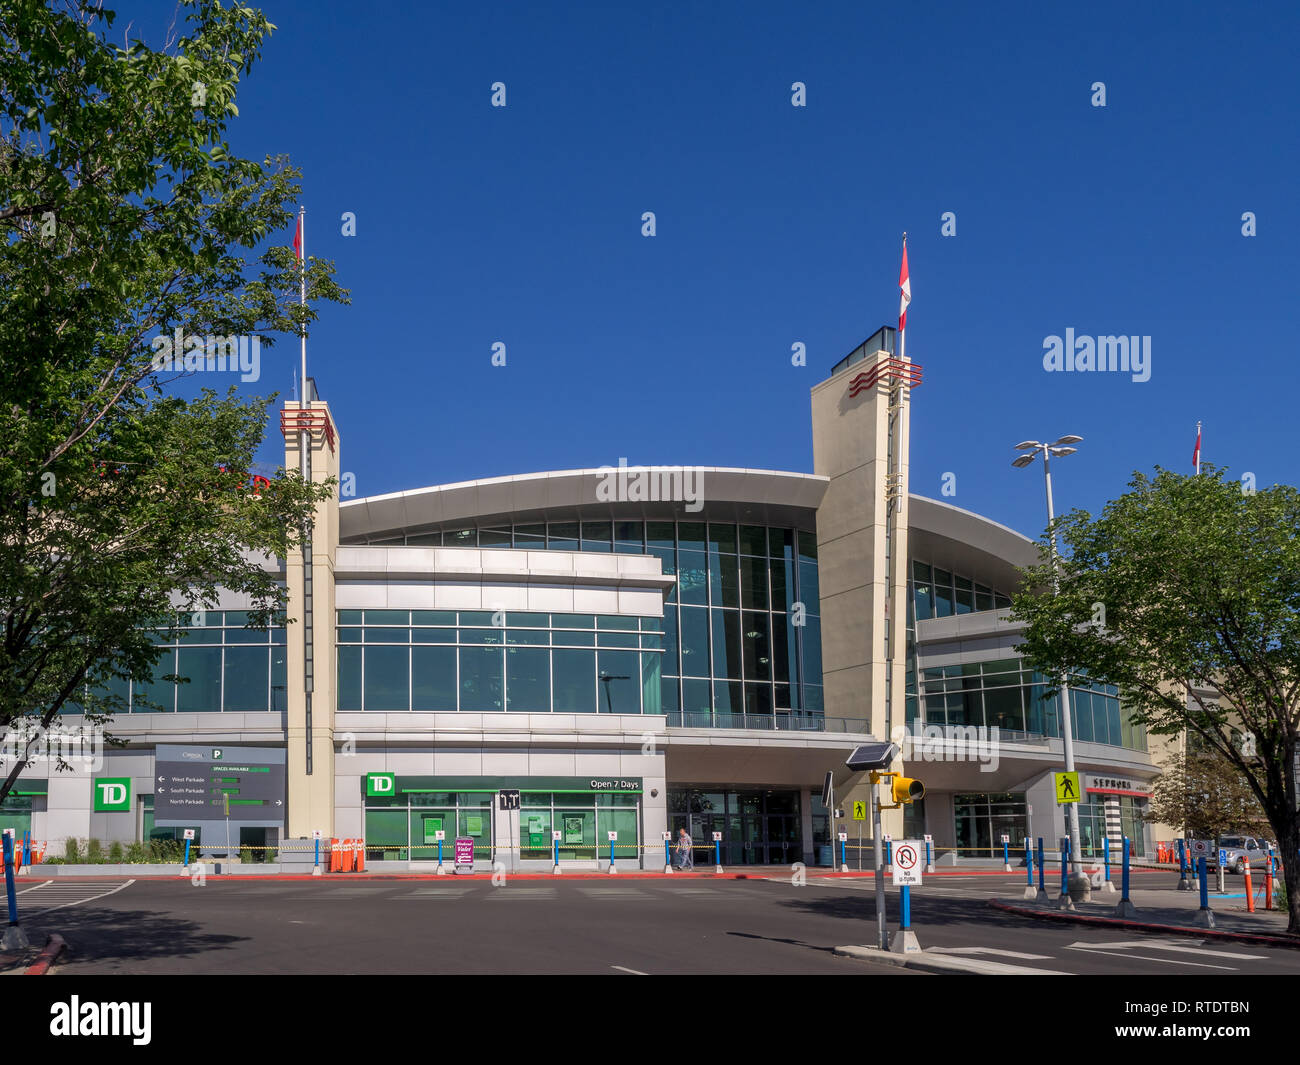 Entrance to Chinook Centre shopping mall on June 5, 2016 in